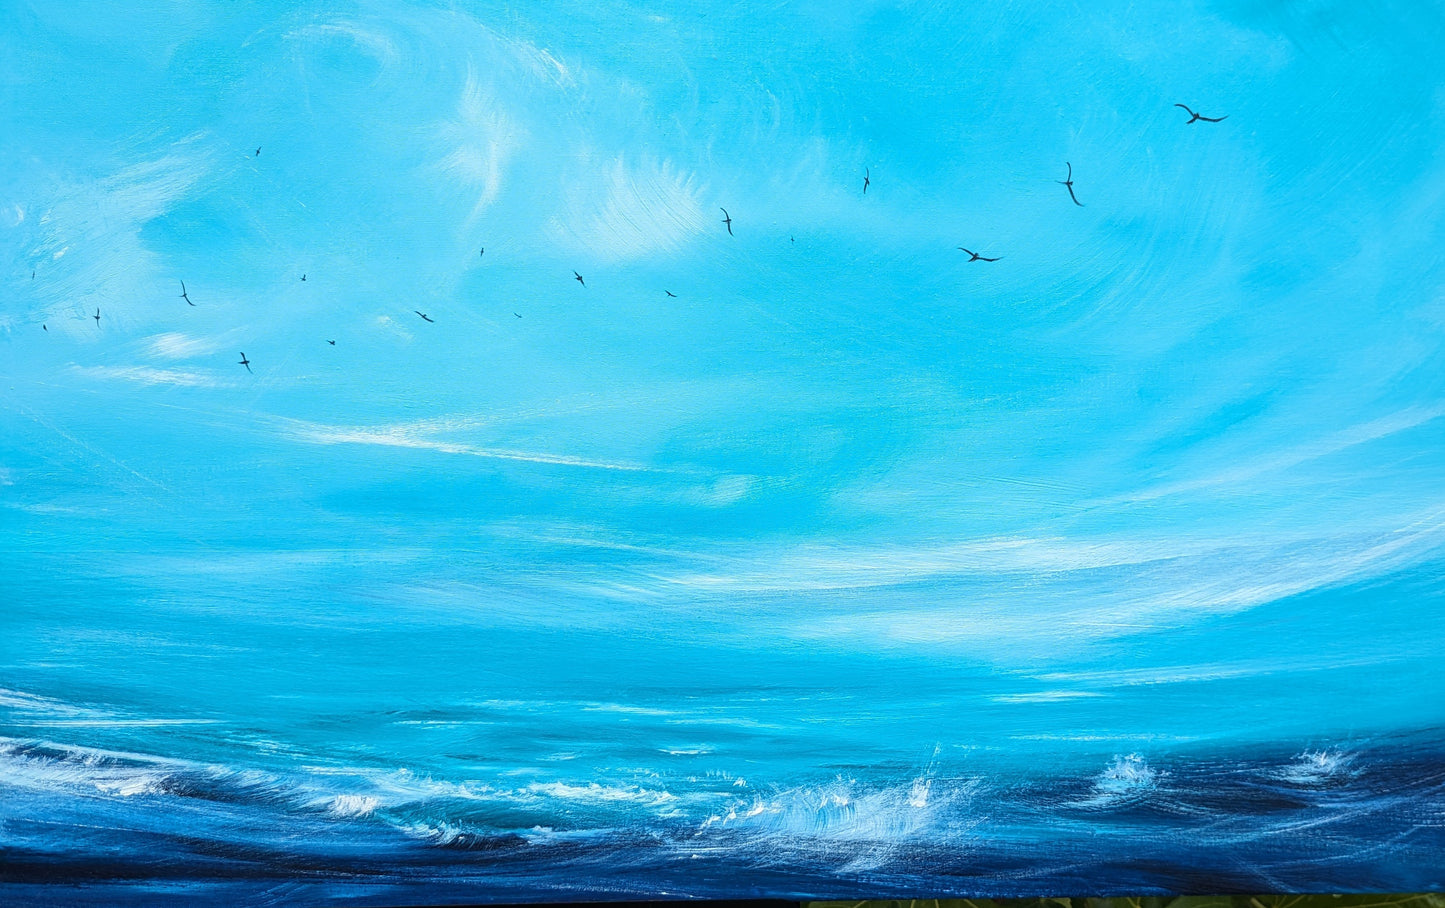 All at Sea, 120x50cm